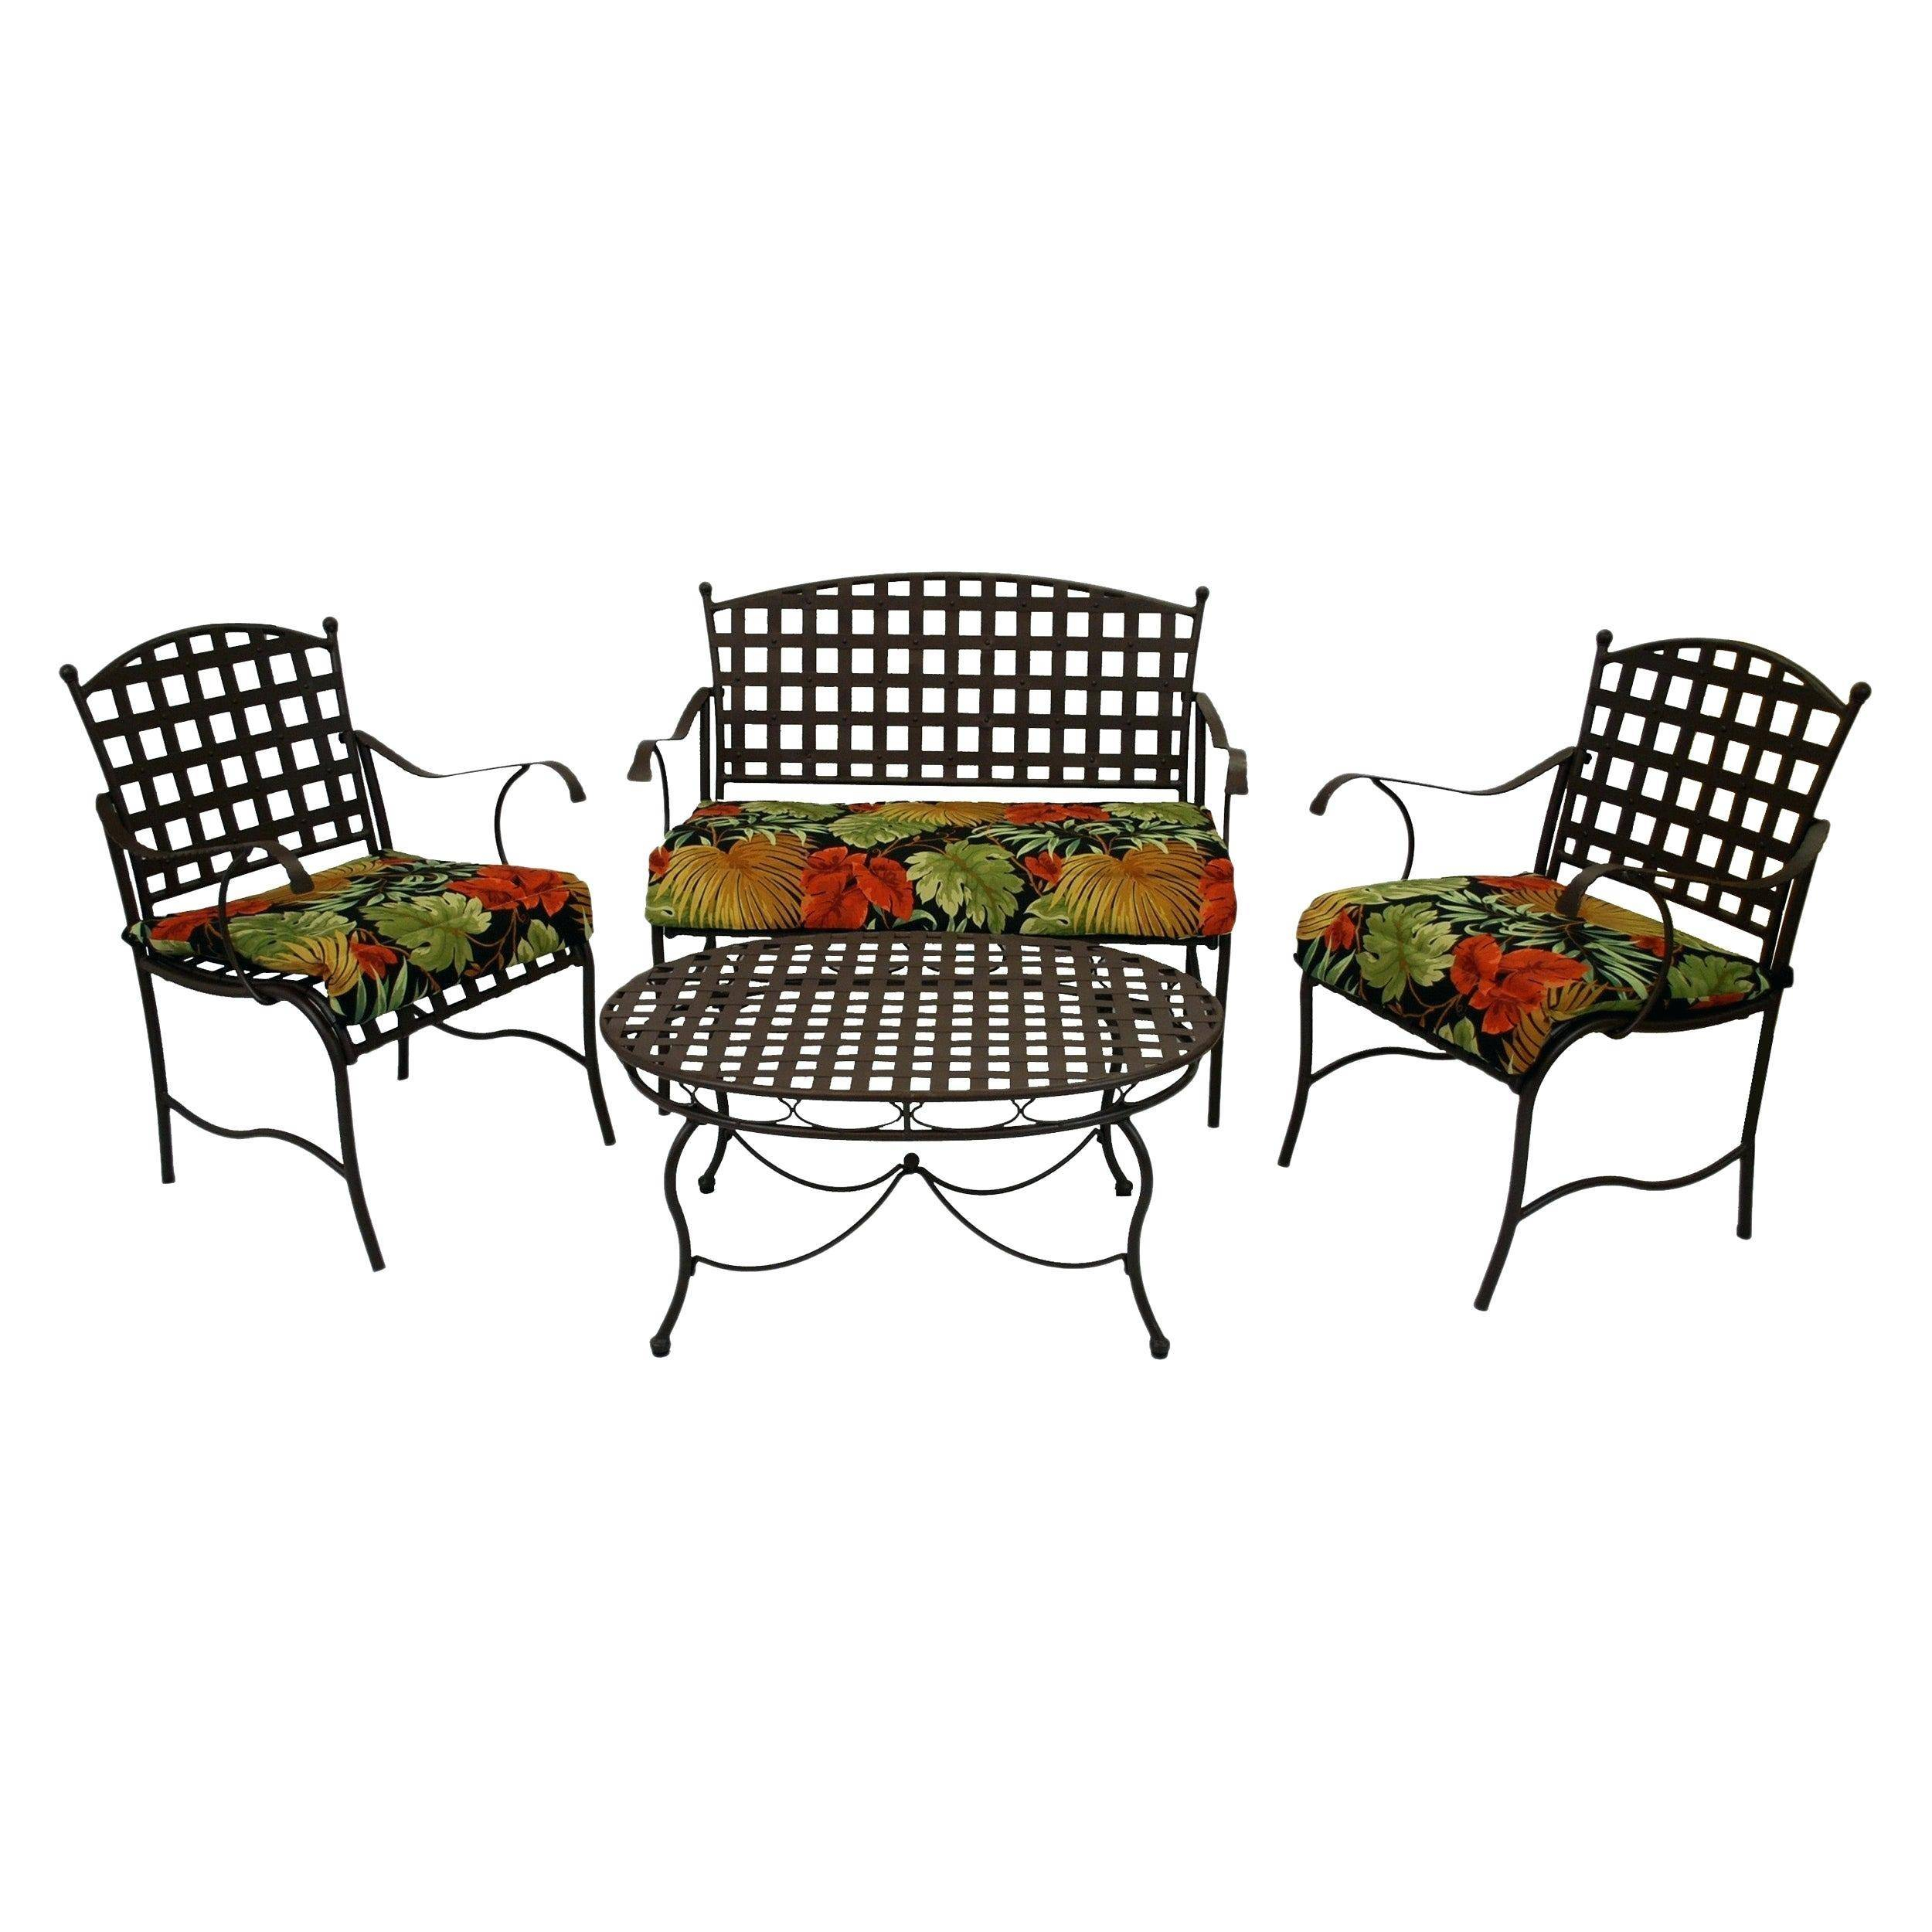 Winsome Wicker Furniture Cushions Sets Patio Alluring pertaining to proportions 2500 X 2500